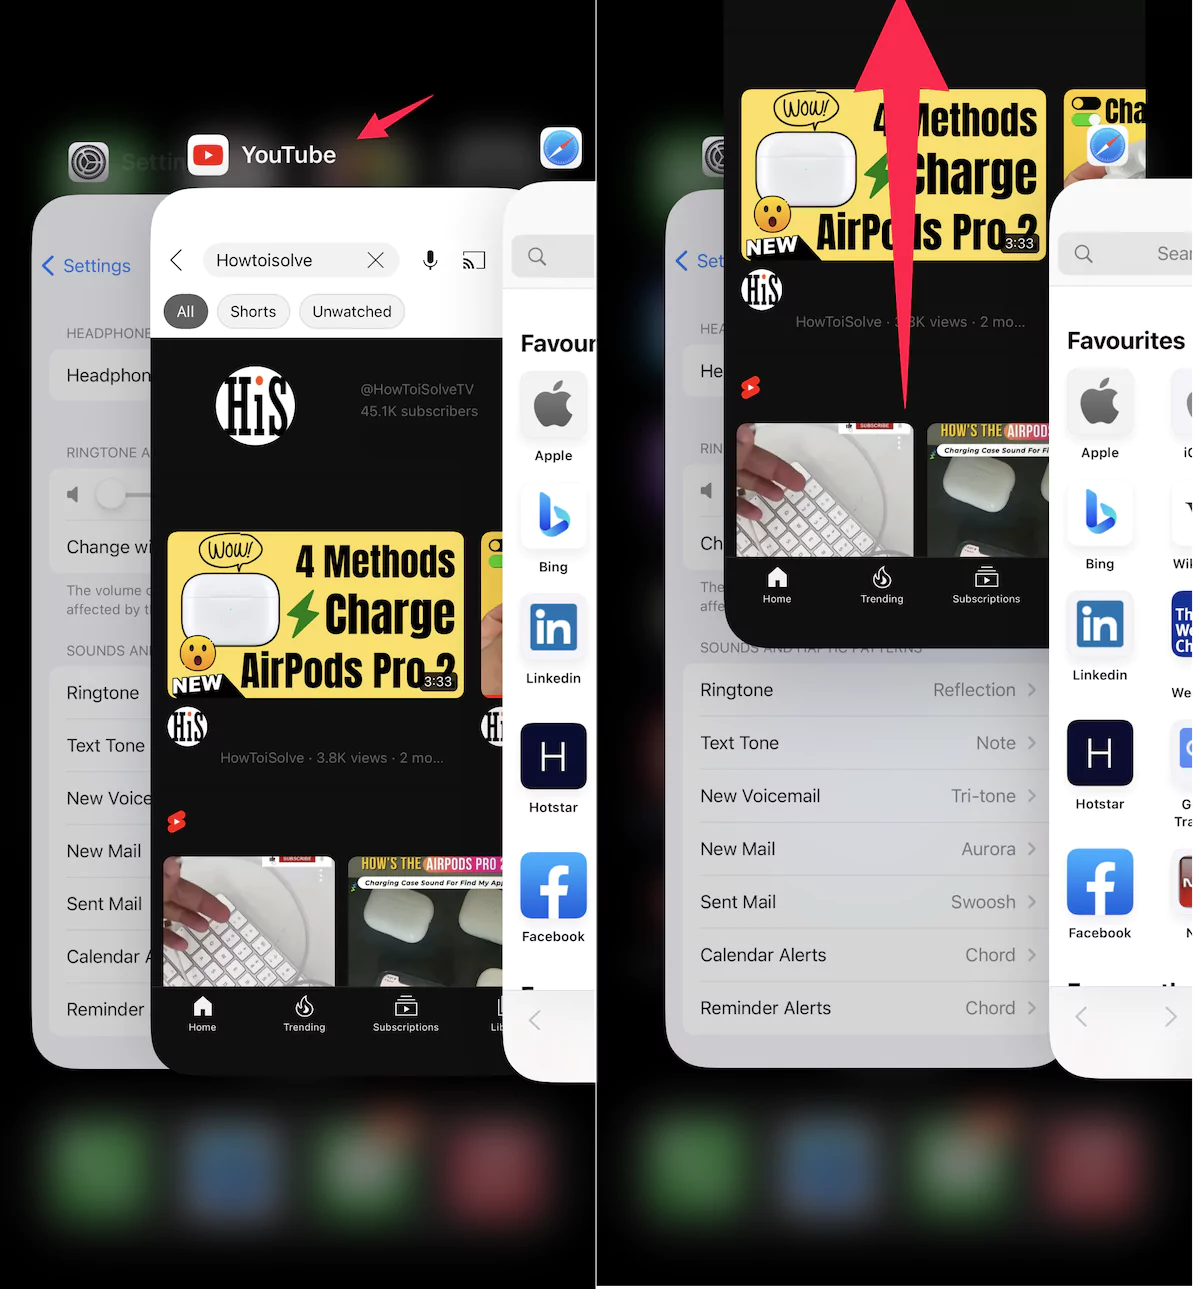 trick on how to force close youtube app on your iPhone with latest iOS or ipad